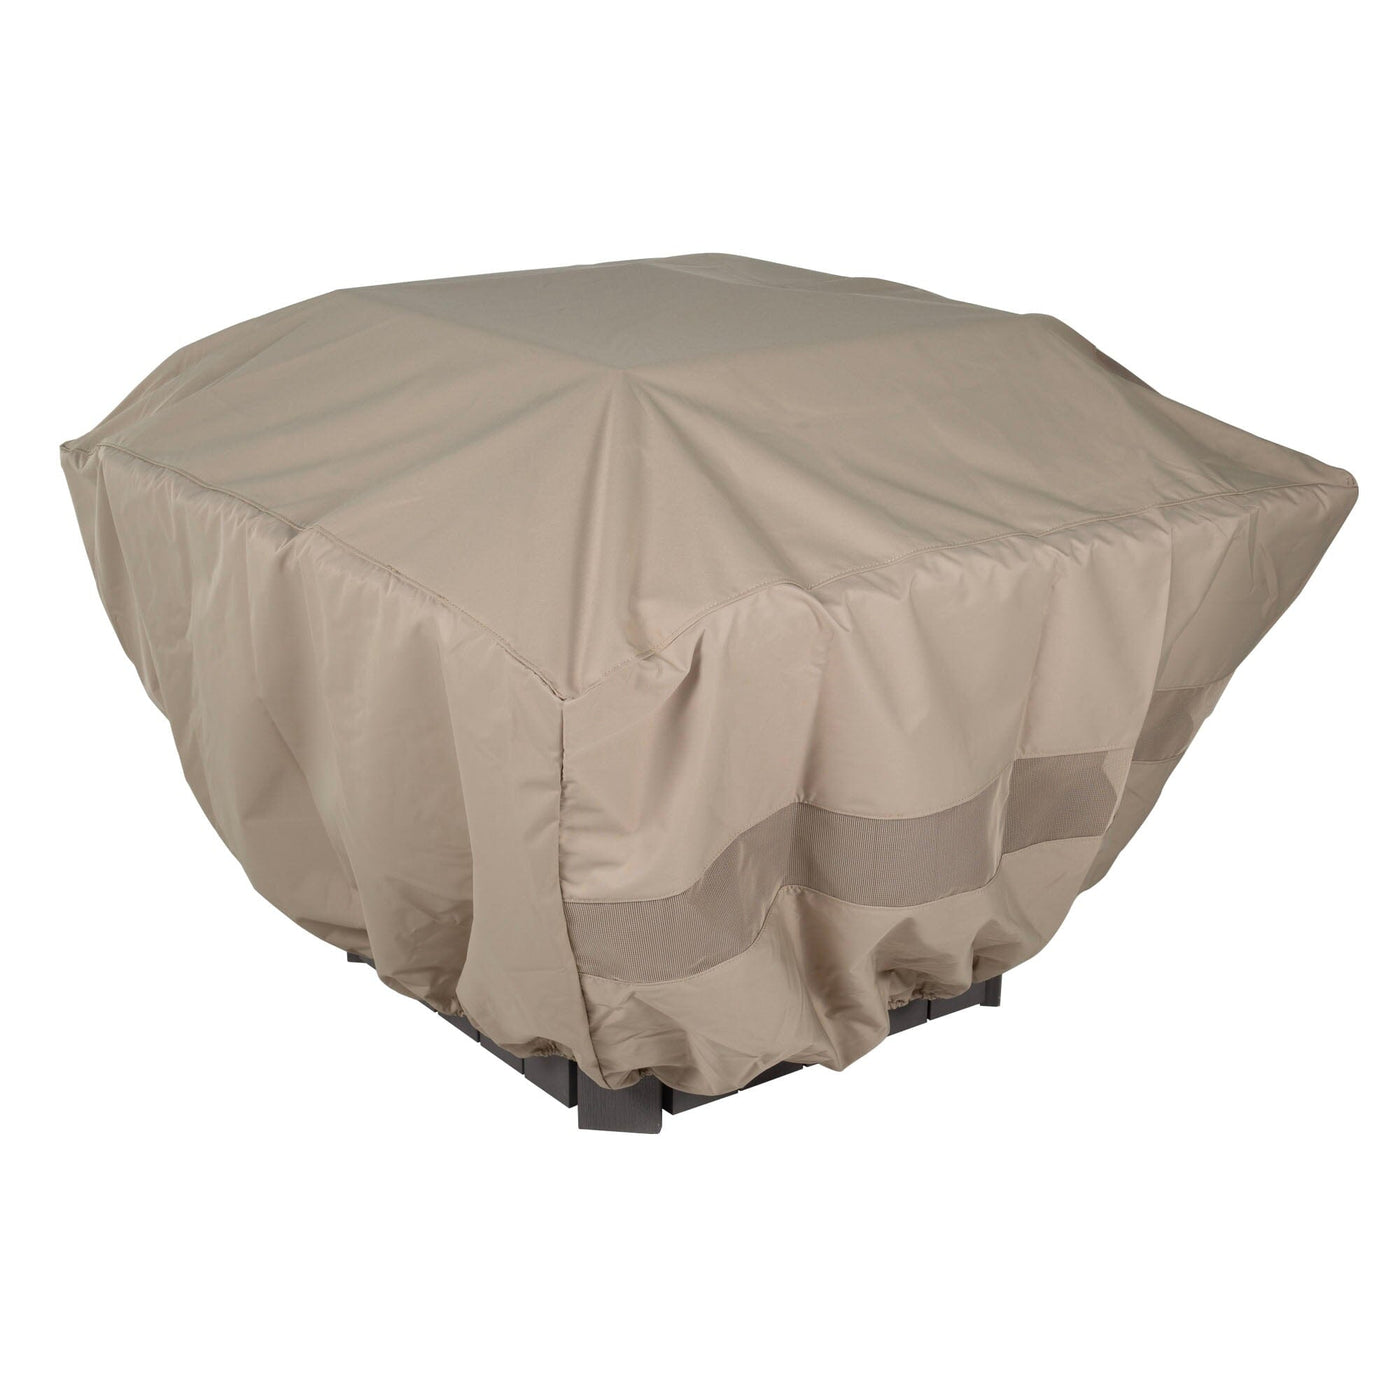 Oasis Fire Table with rain cover